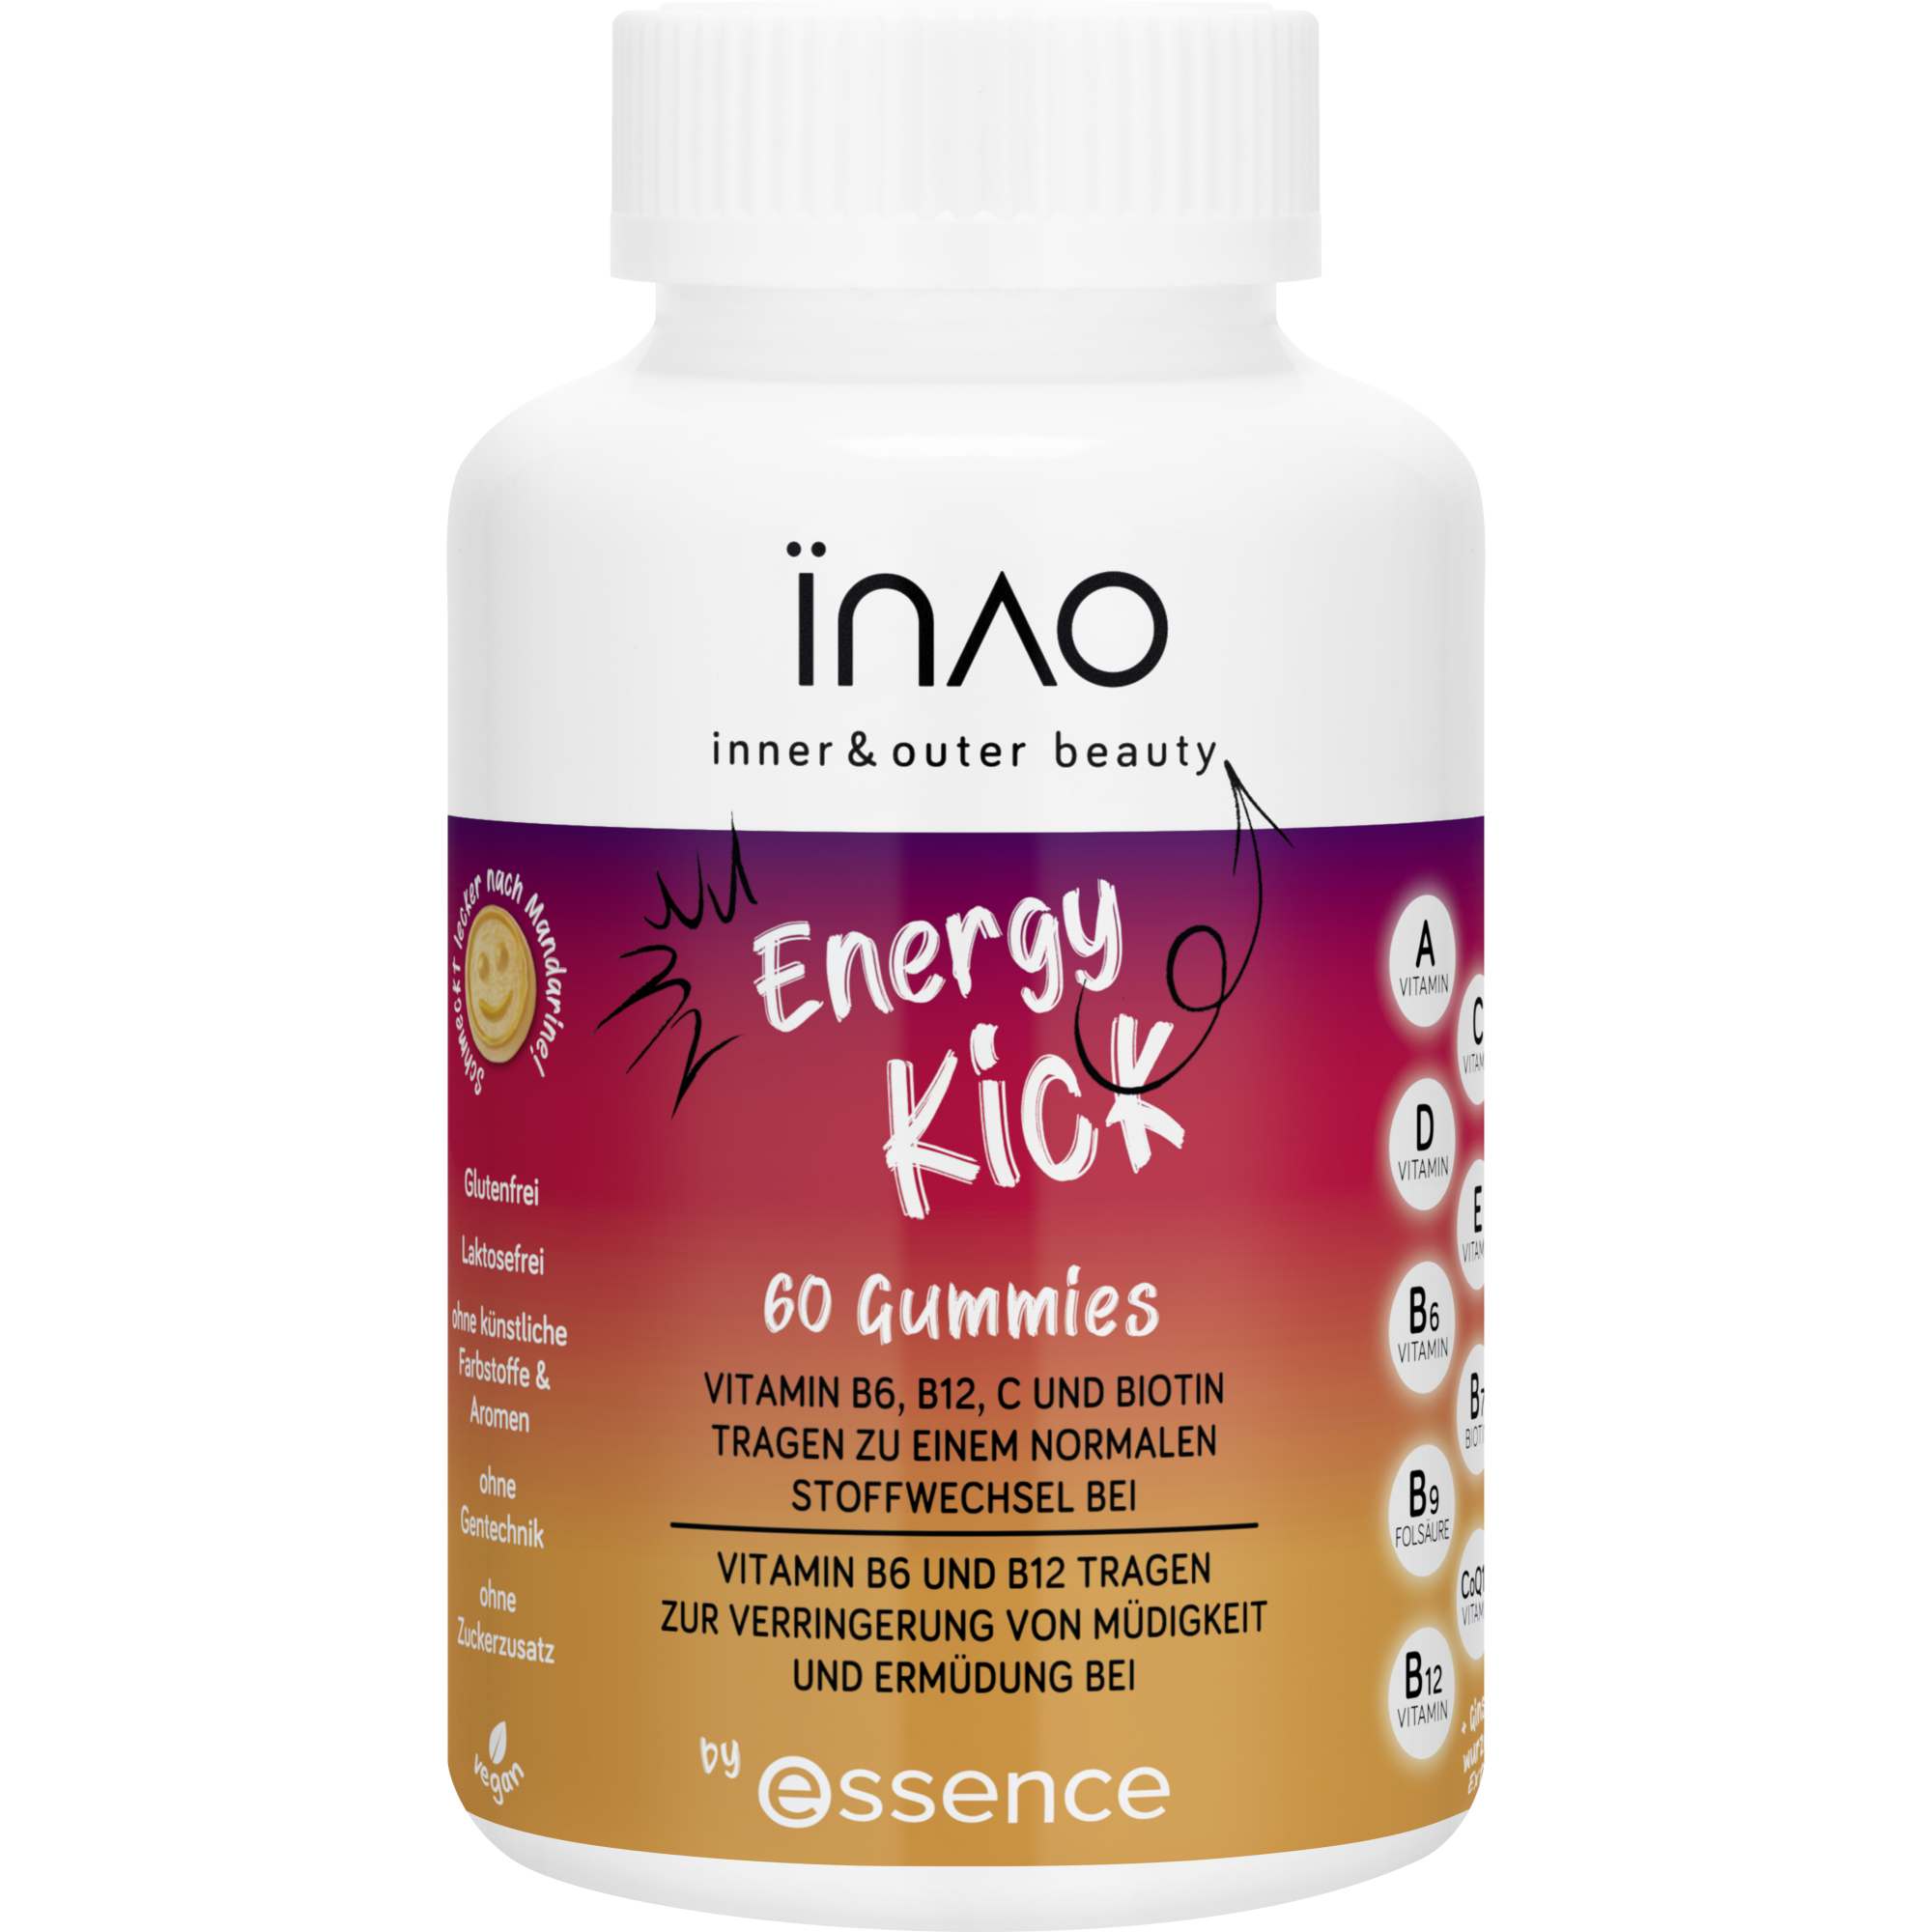 INAO inner and outer beauty Energy Kick gummies by essence